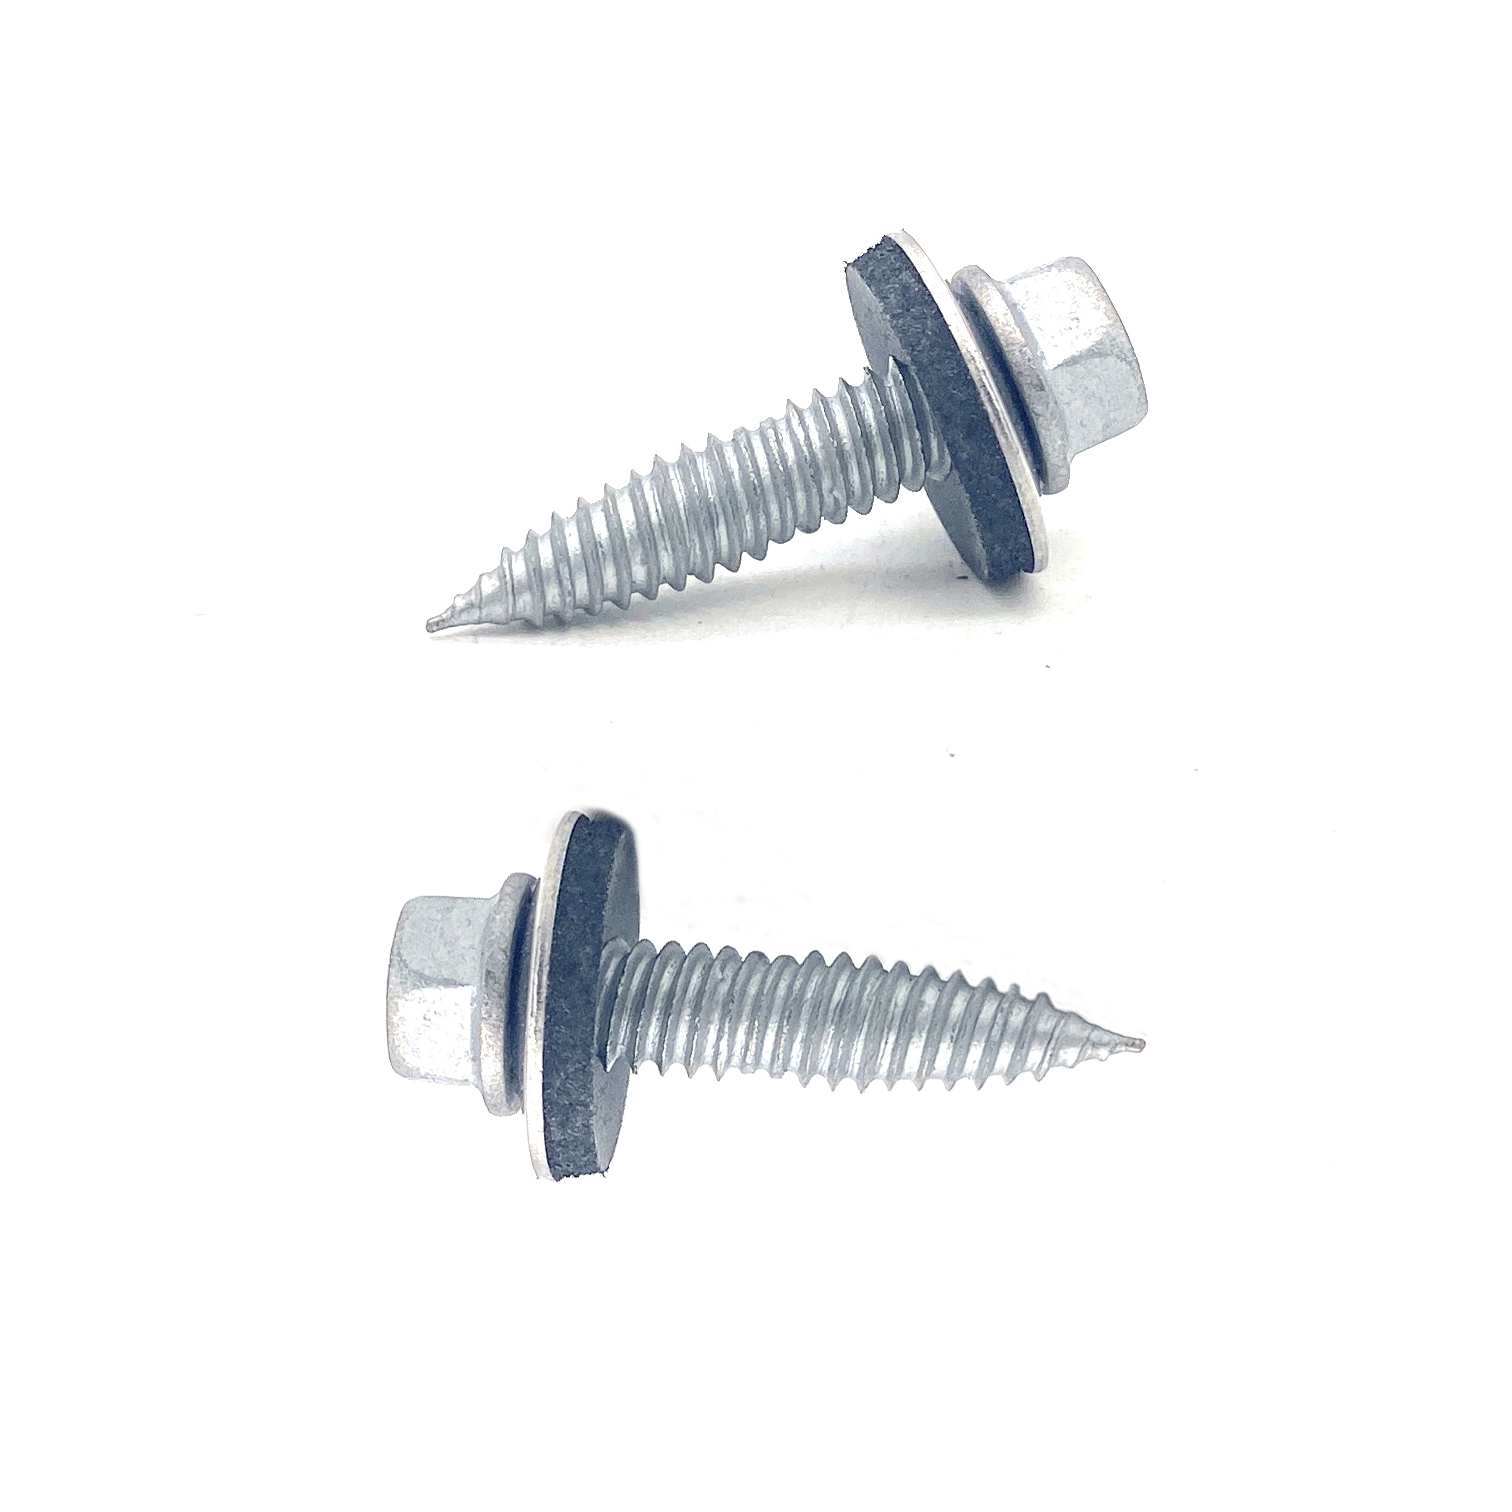 SS304 SS410 Solar Photovoltaic System Hex Flange Self Tapping Bi-metal Screw